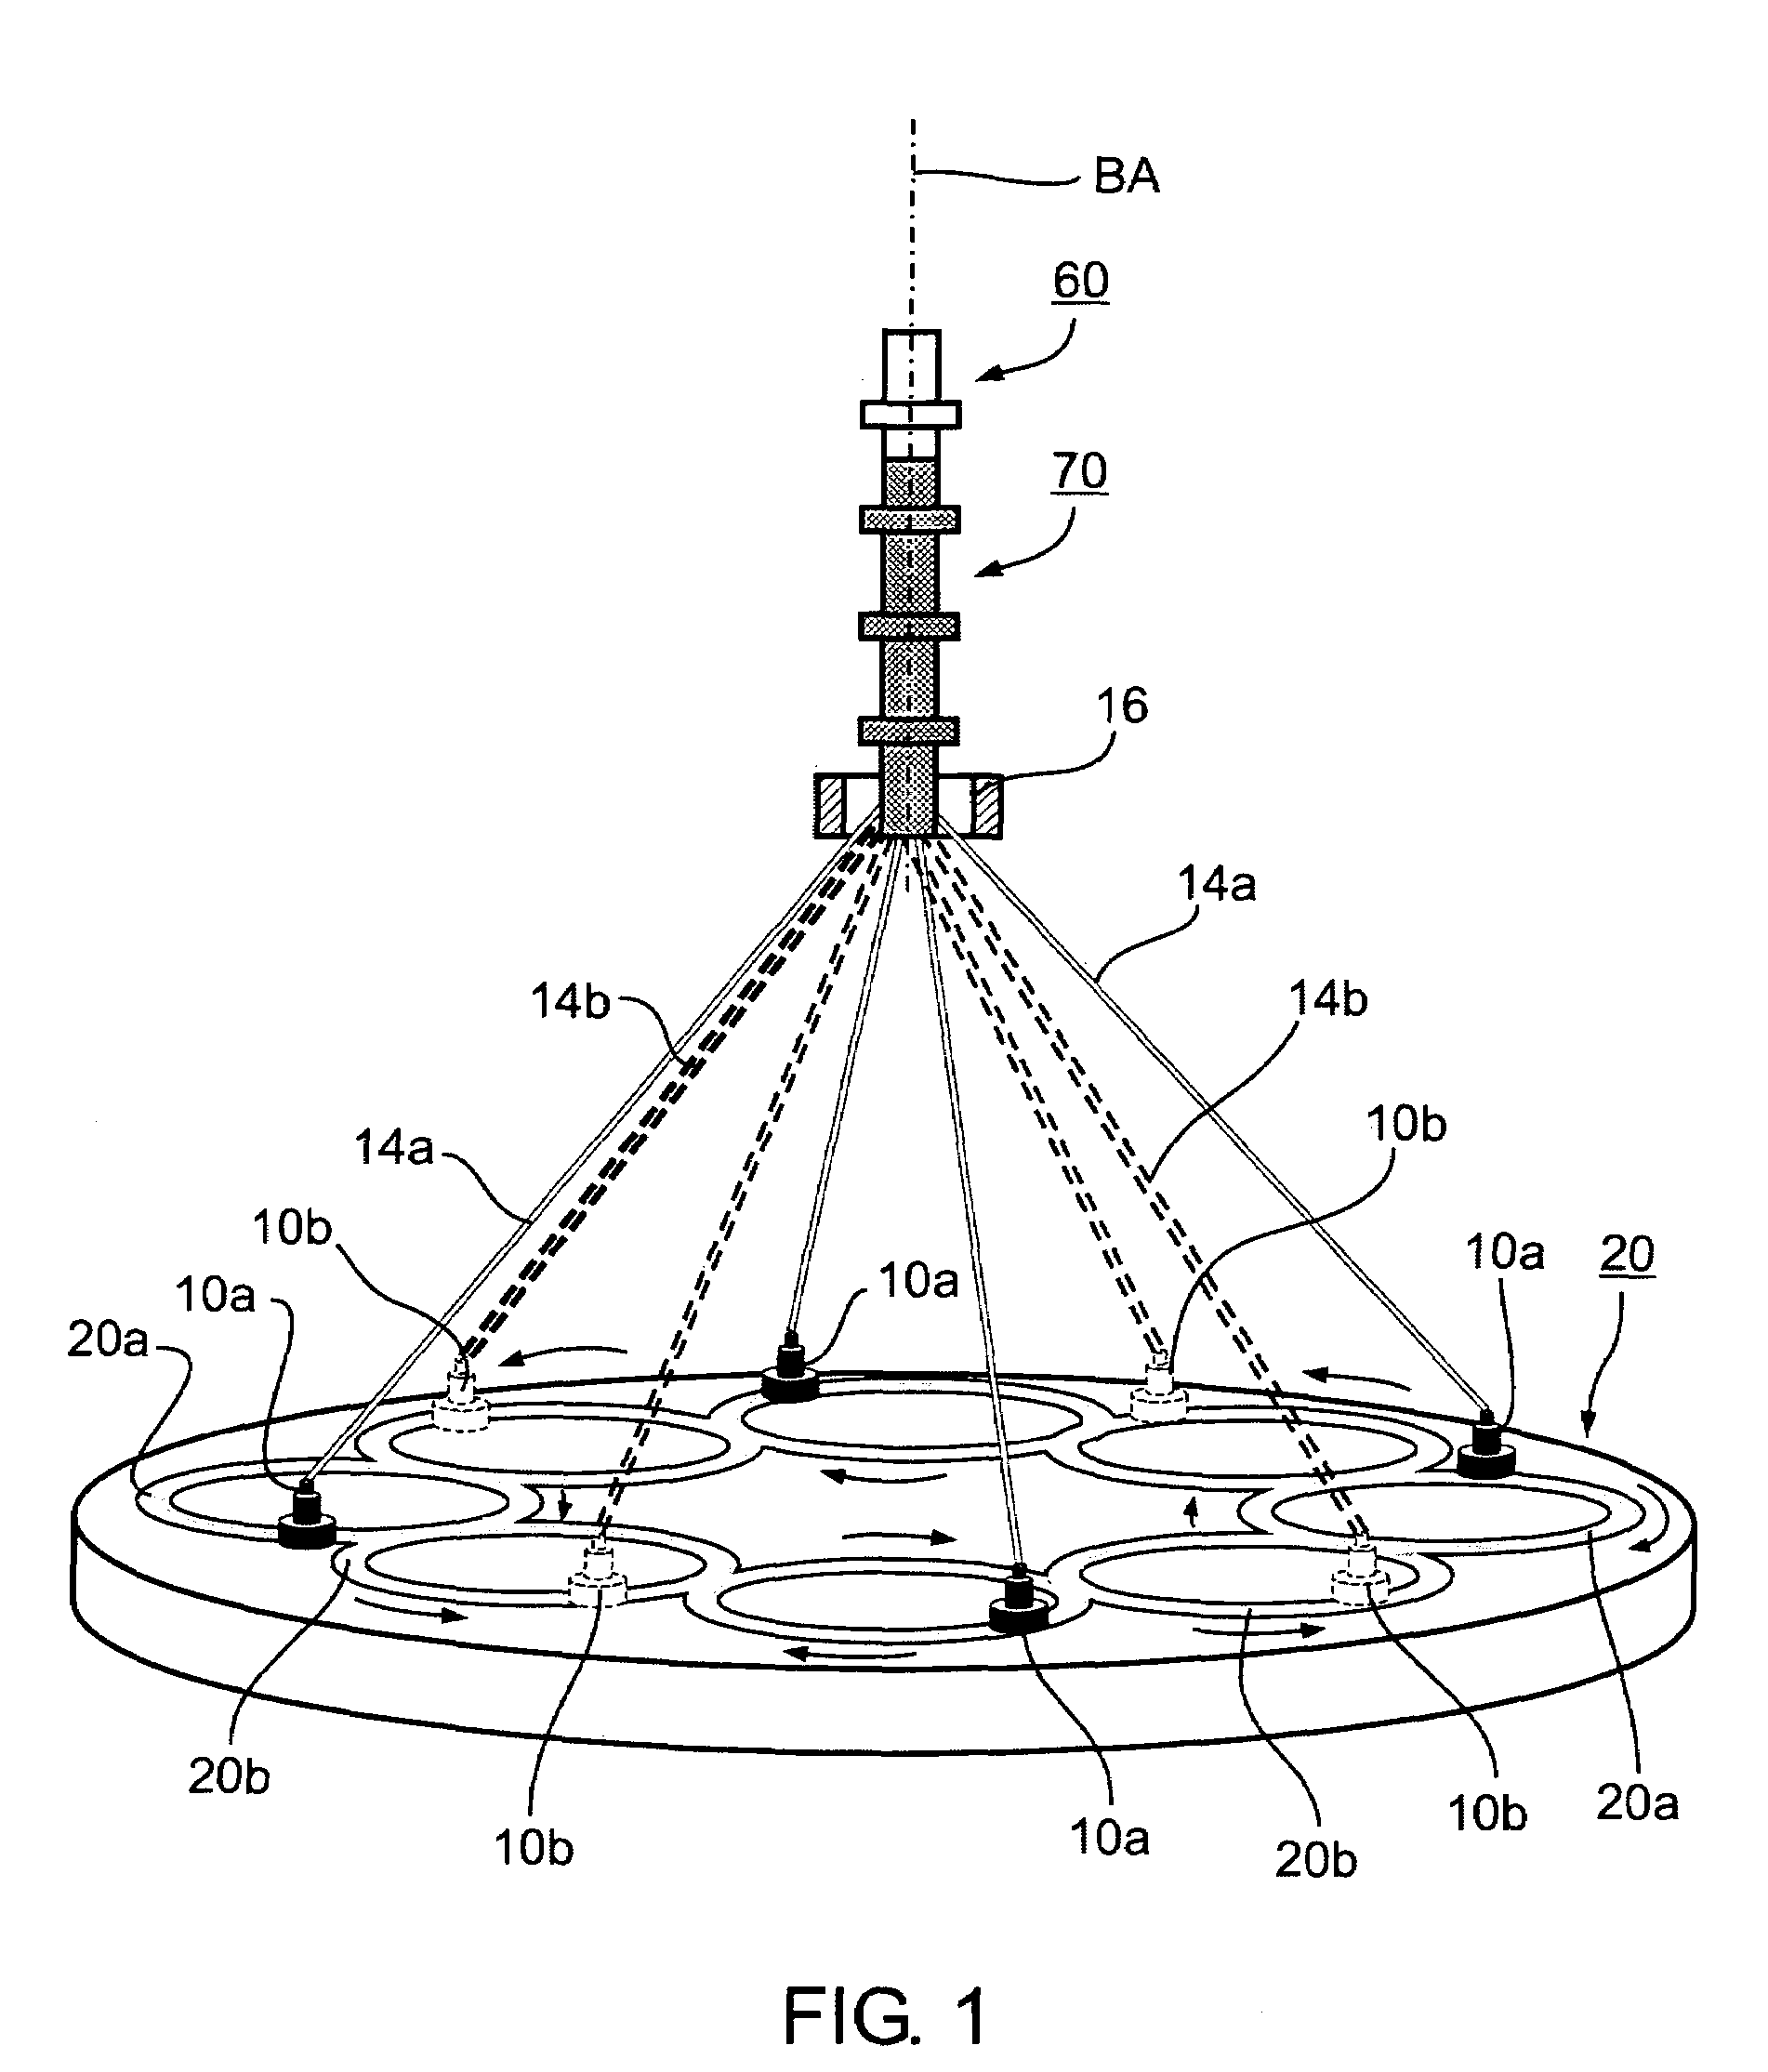 Mixed wire braided device with structural integrity